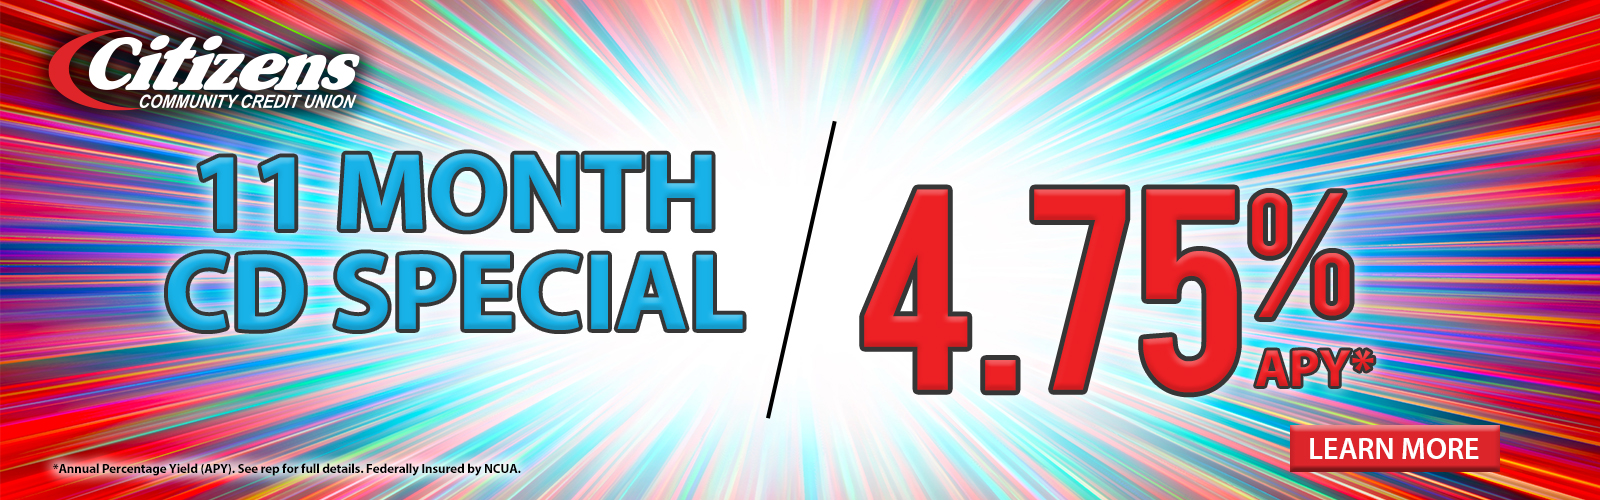 11 Month CD Special - 4.75% APY*. Click here for more information!